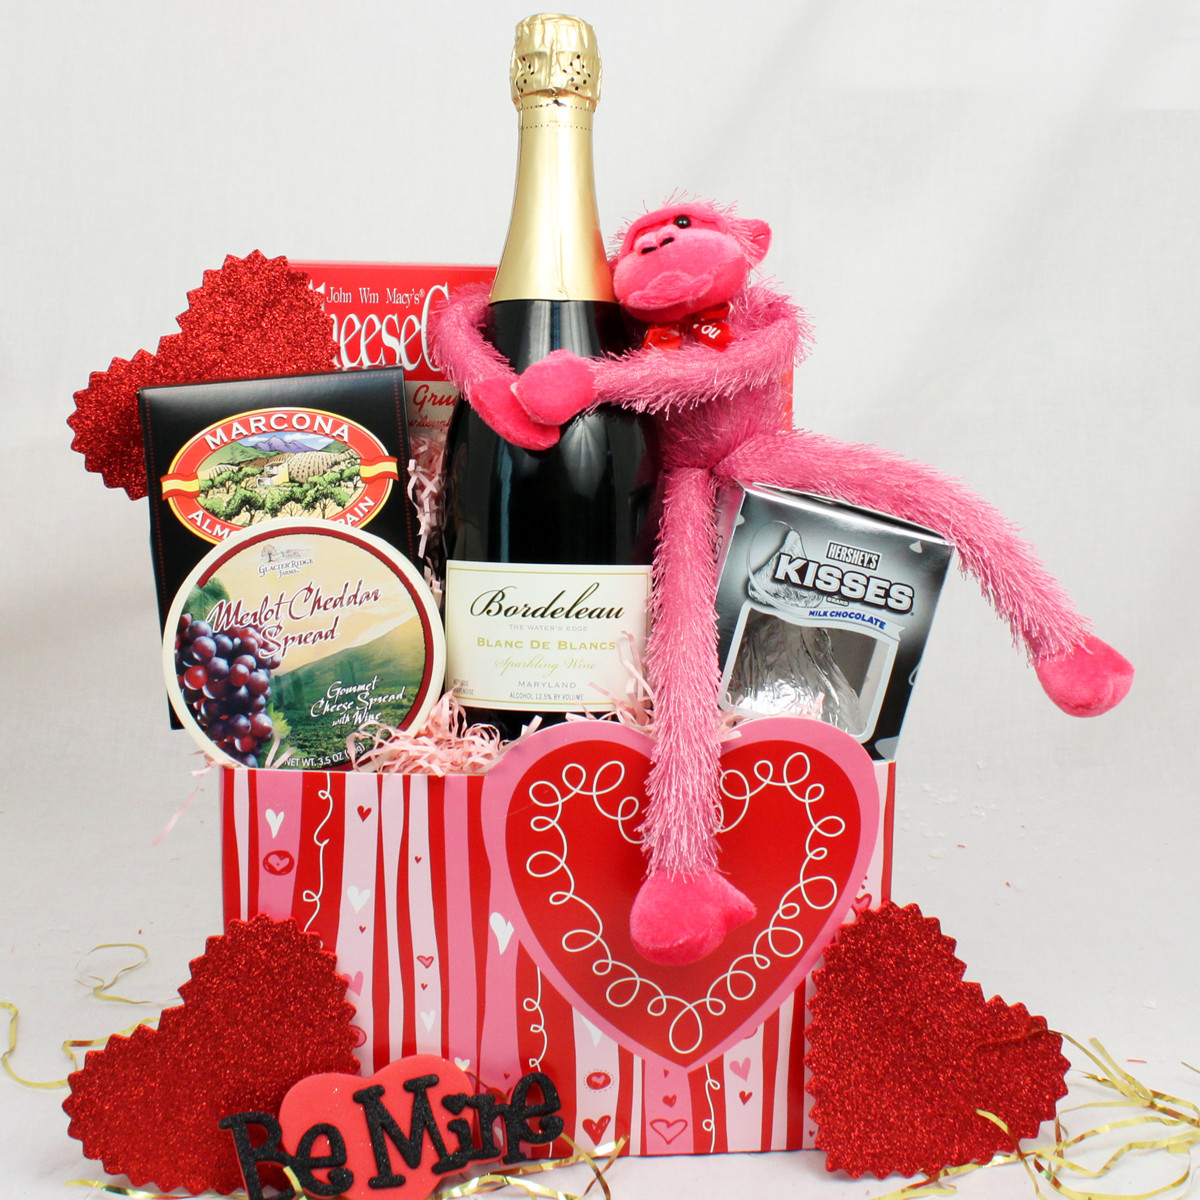 Valentine Creative Gift Ideas
 Creative and Thoughtful Valentine’s Day Gifts for Her